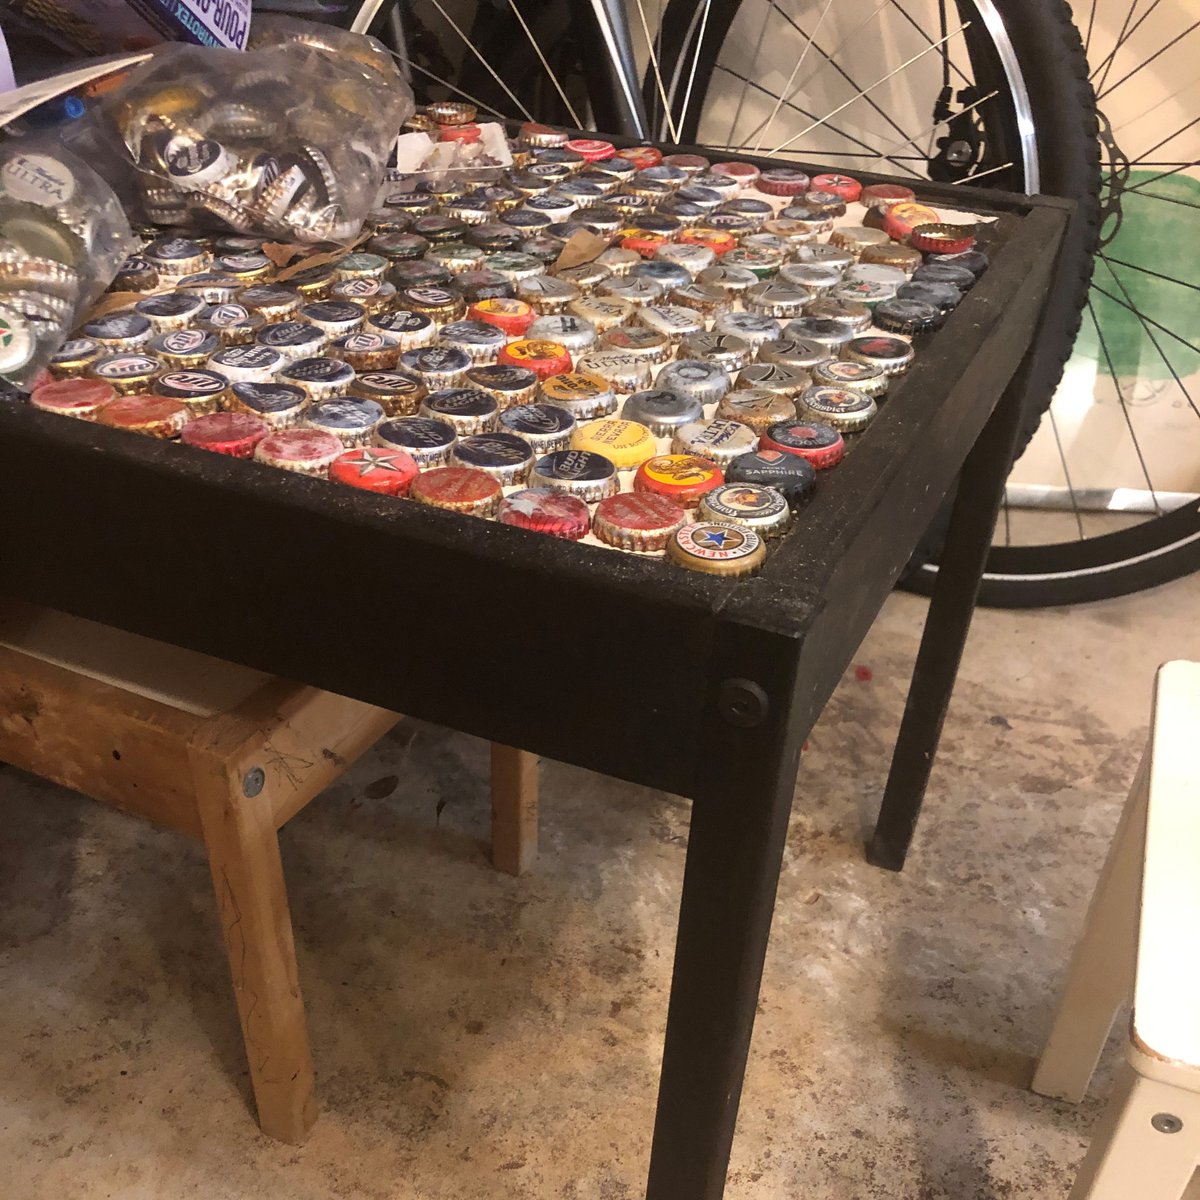 We can buy less and  #repurpose used items, like this  #artchair that got a new life, or the train table turned  @LEGO_Group table when the kids grew out of toy trains. Or the toddler table turned end table as the kids repurpose their bottle cap collection.9/